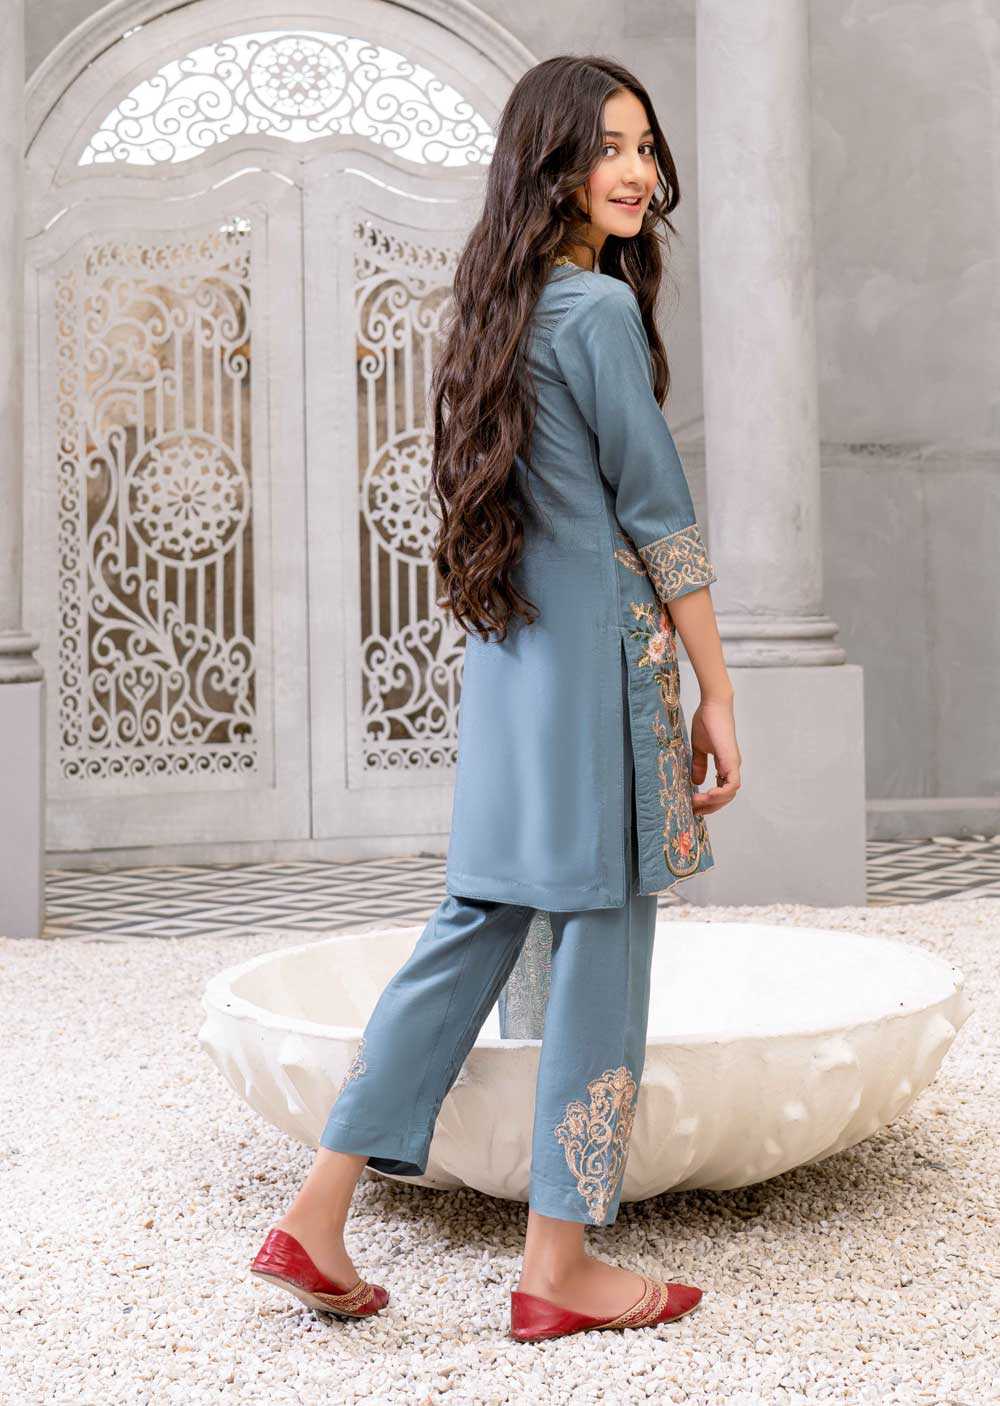 HK08 Readymade Grey/Green Embroidered Mother & Daughter Linen Suit - Memsaab Online